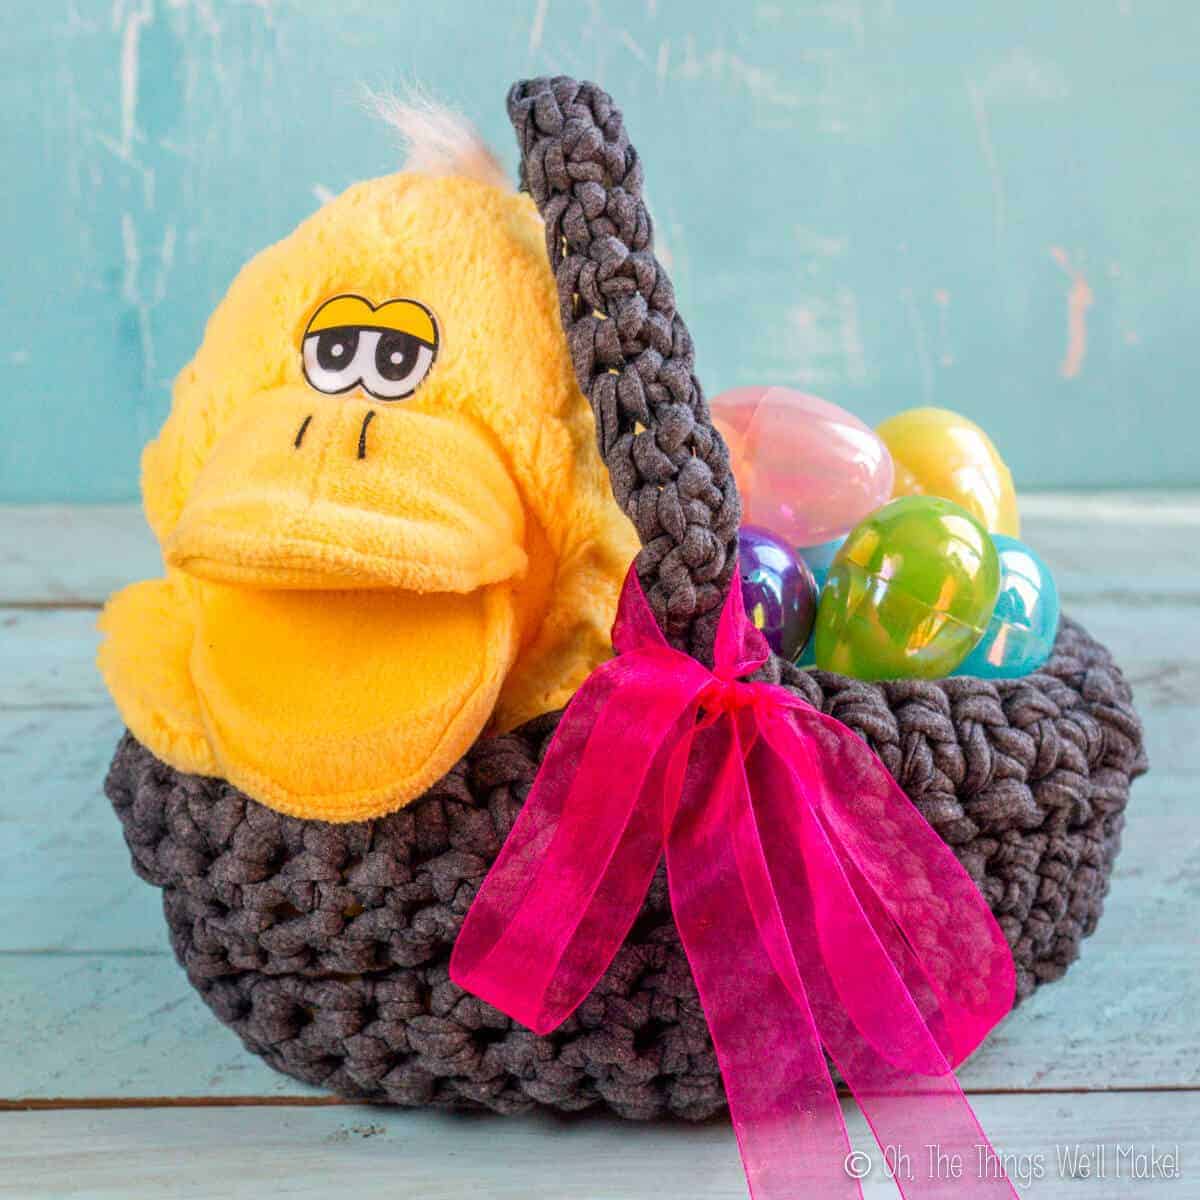 A yellow duck stuffed animal and plastic eggs inside a homemade Easter basket made from t-shirt scraps. The basket is decorated with a big pink bow.